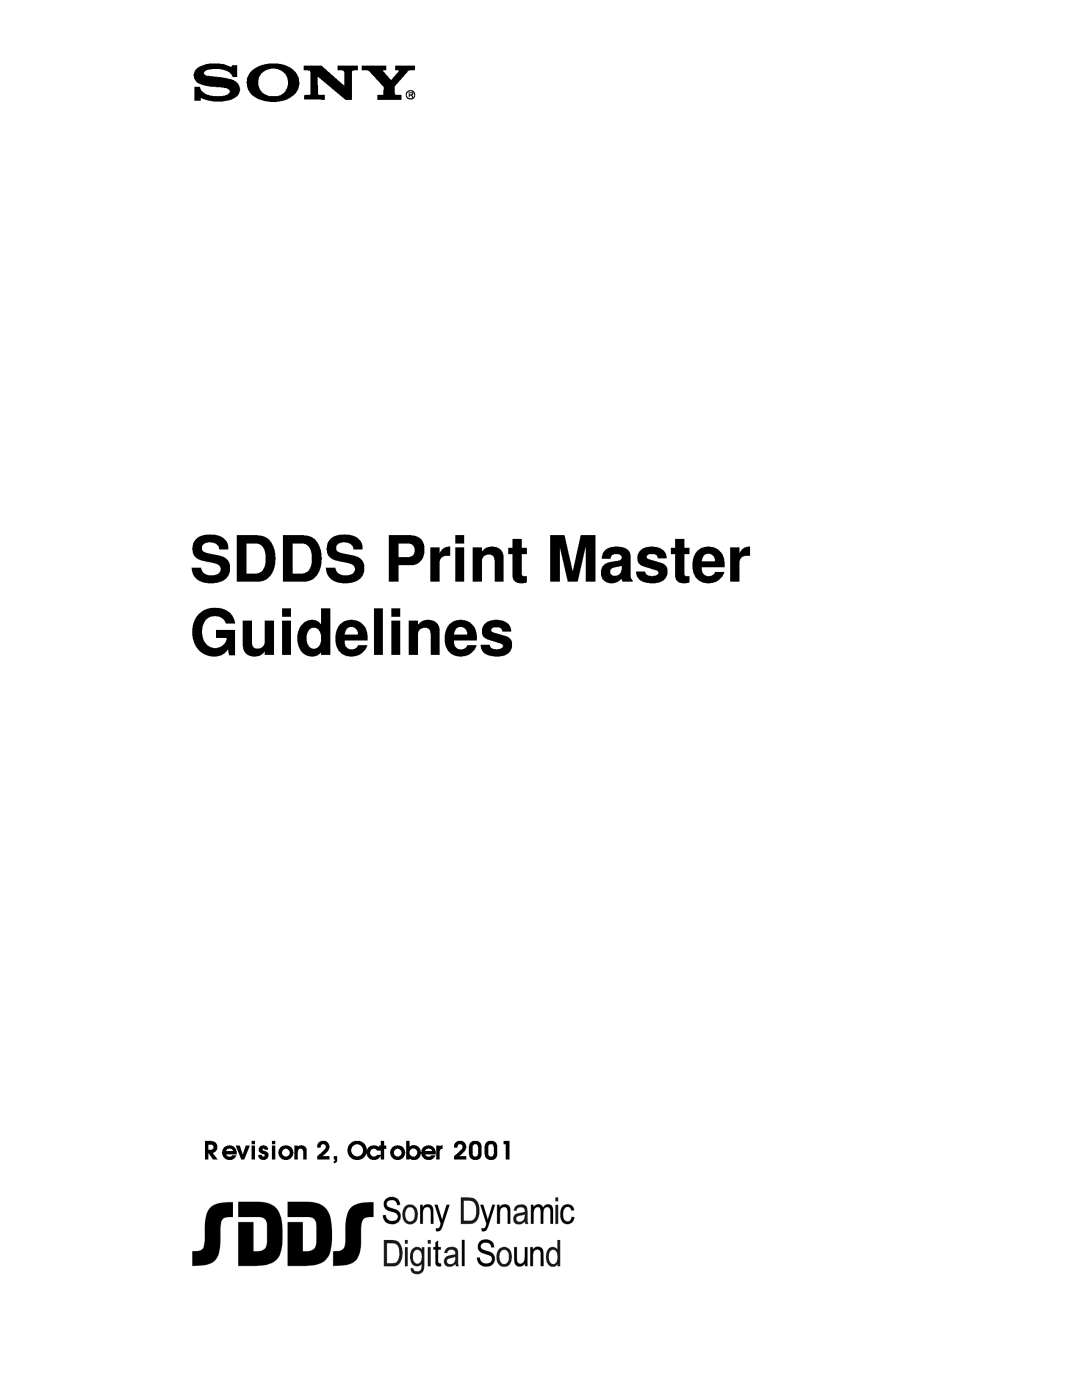 Sony manual SDDS Print Master Guidelines, R evision 2, October 